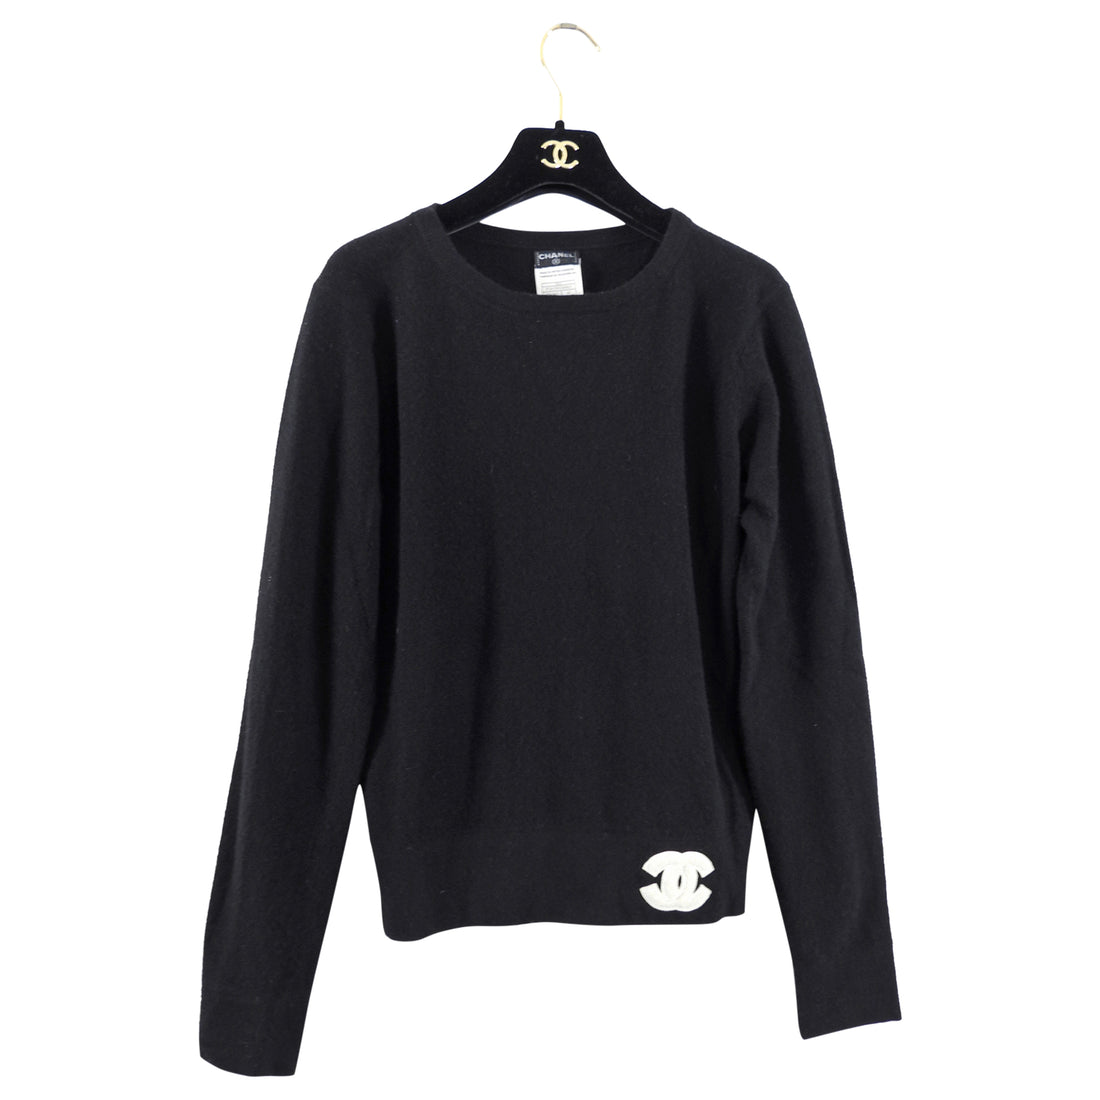 Chanel 01A Black Cashmere Sweater with White CC Logo - S